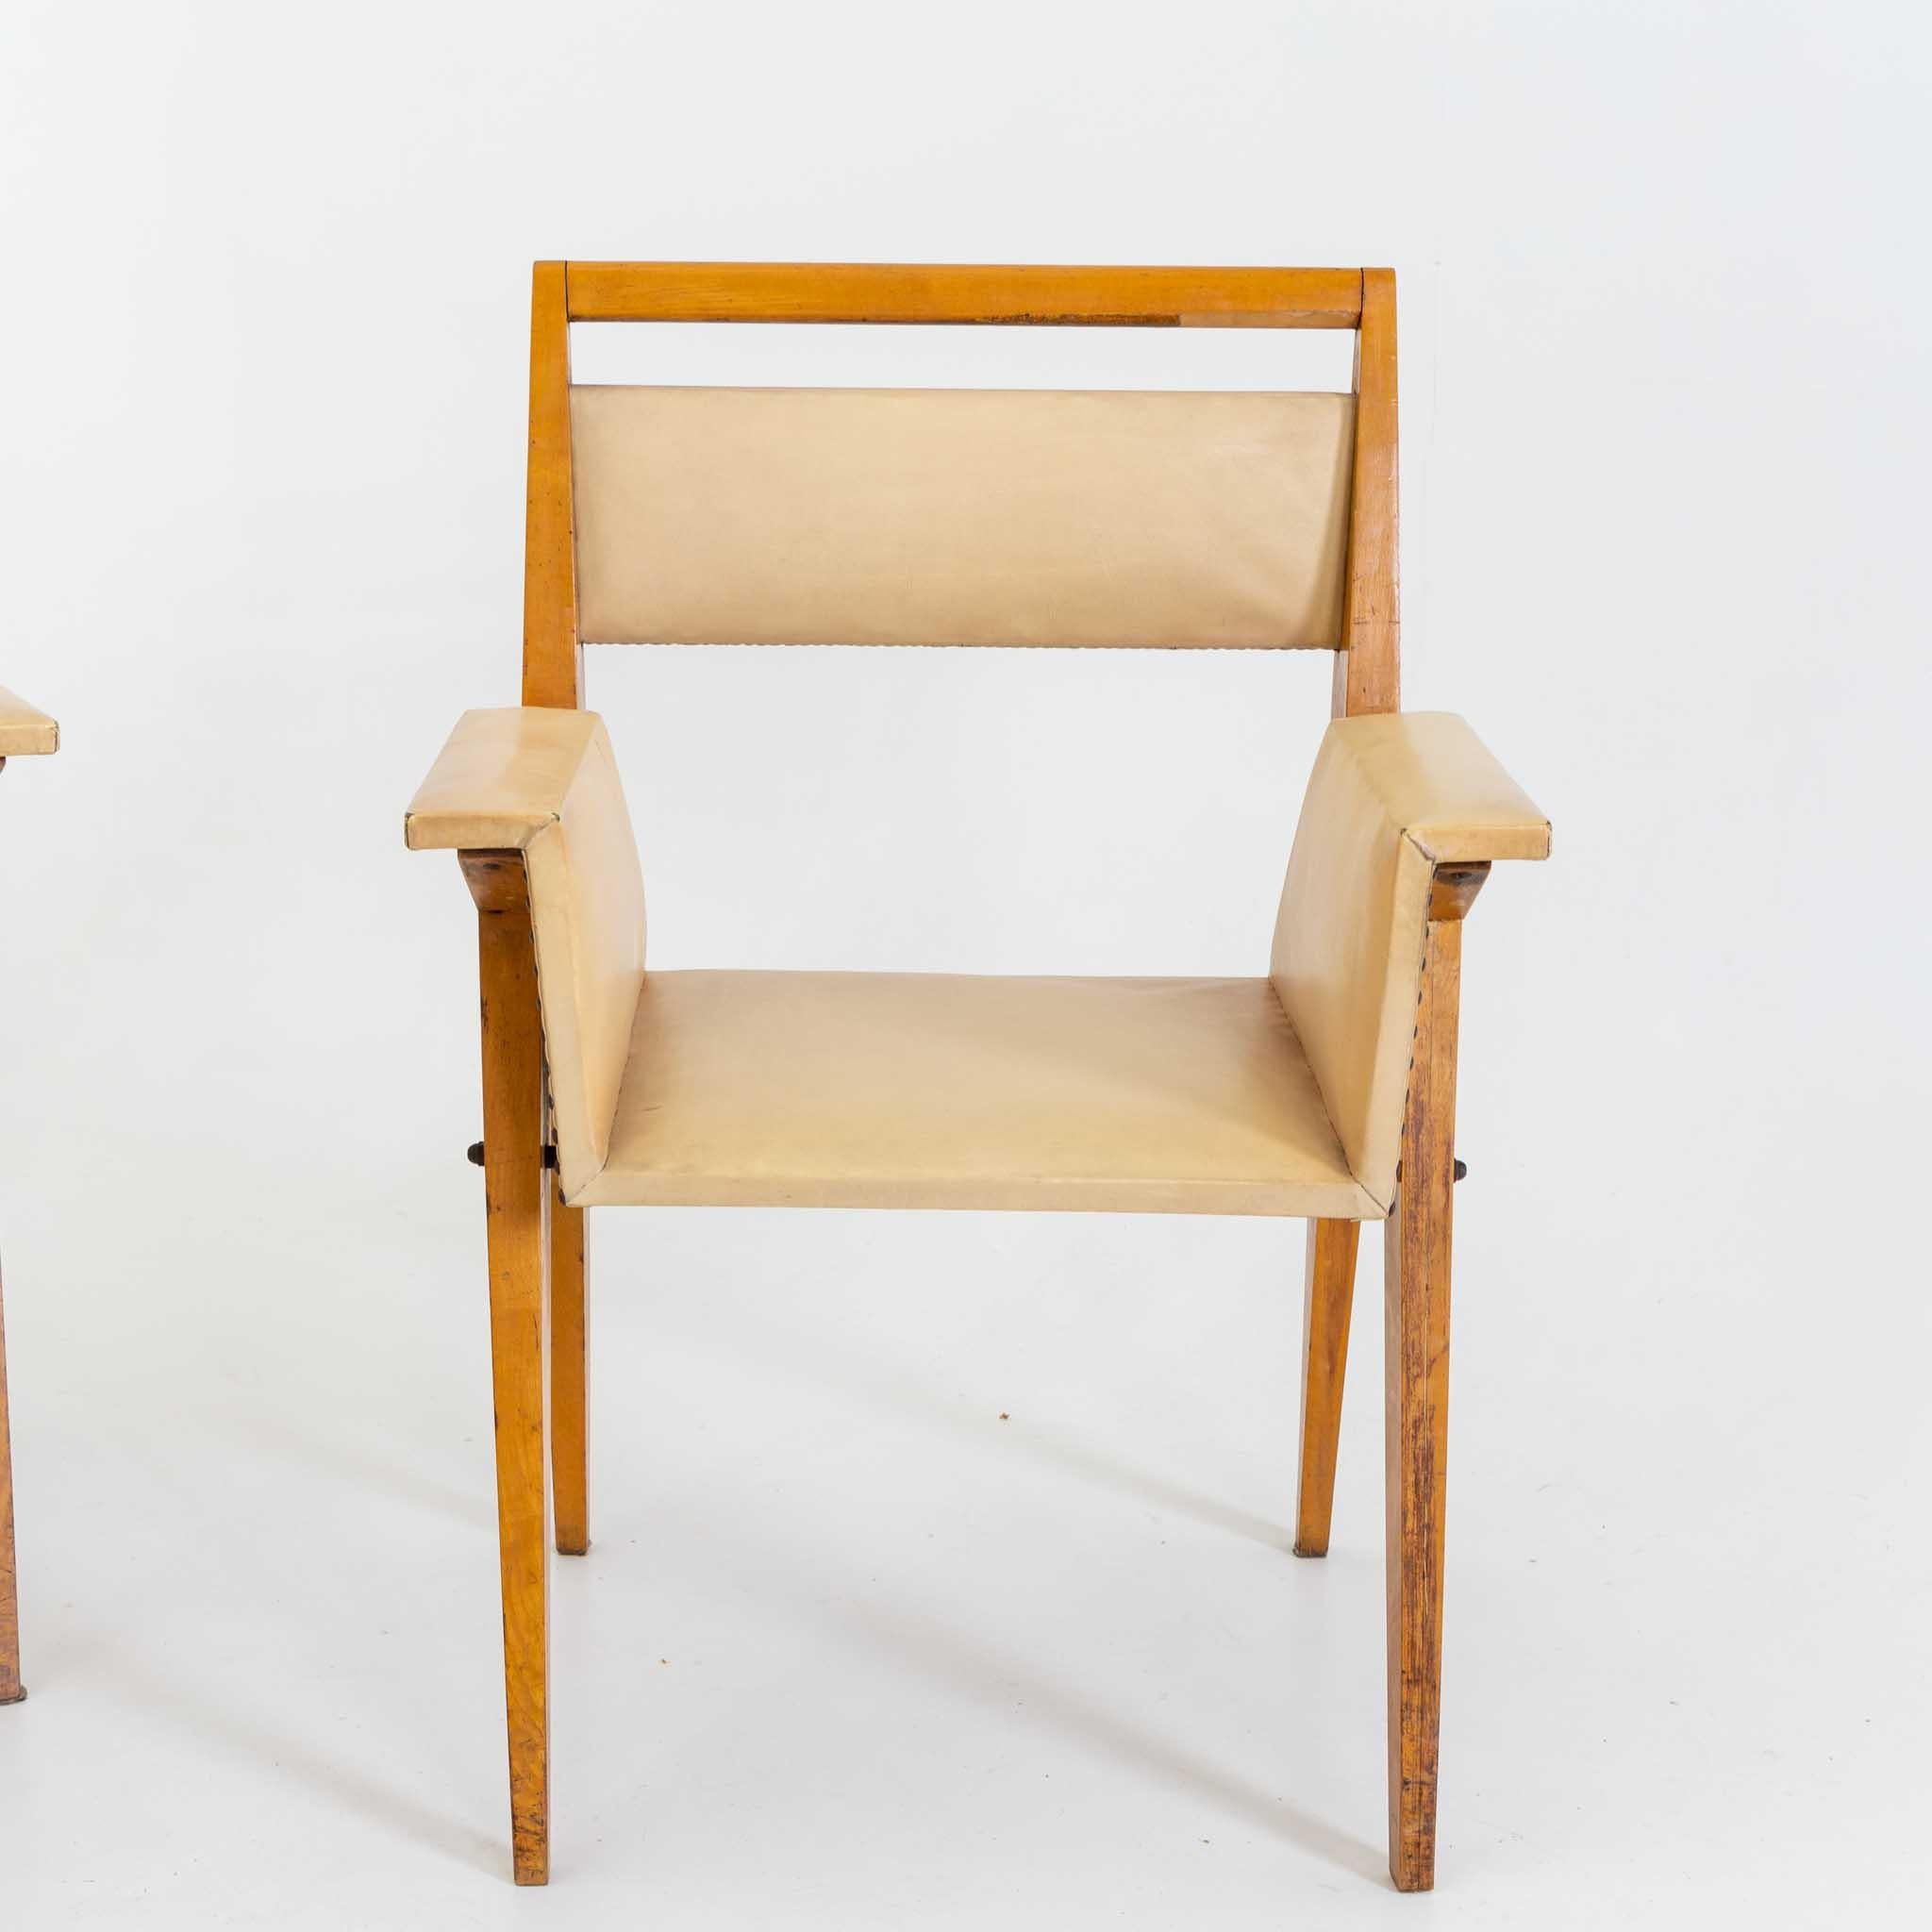 Wood Armchairs, Designed by Vittorio Armellini, Italy Mid-20th Century For Sale